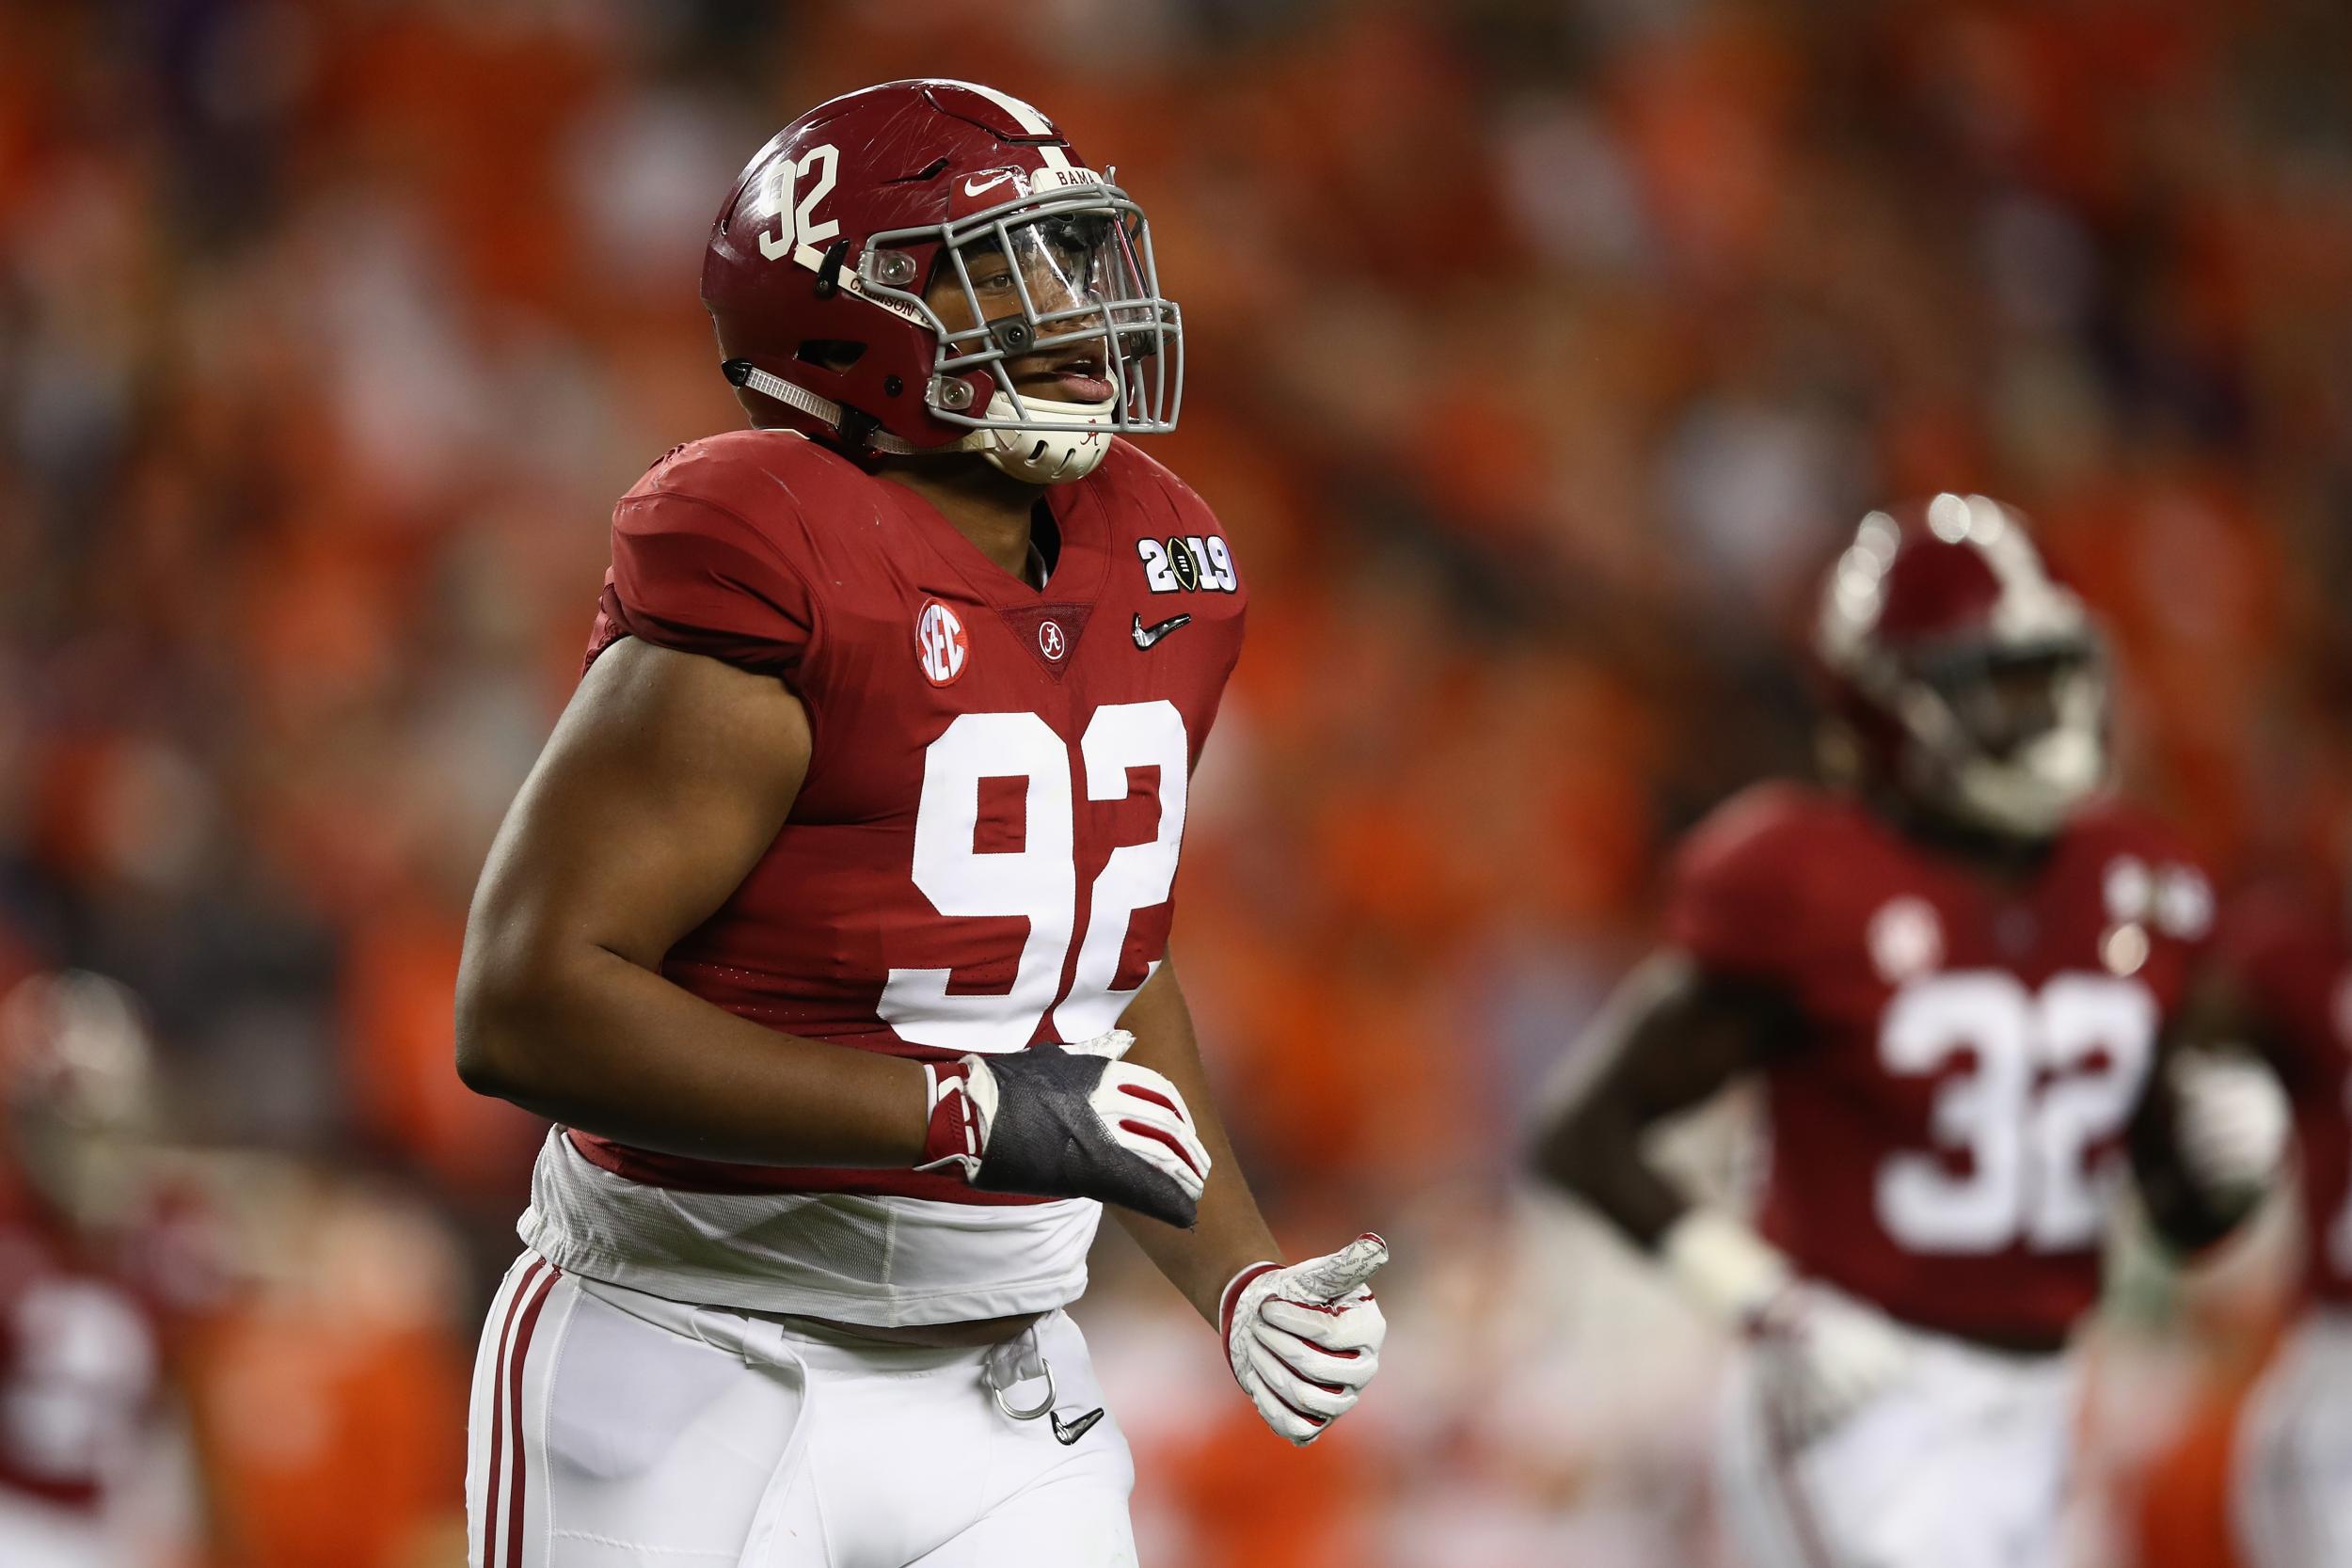 Quinnen Williams is a highly-rated defensive prospect